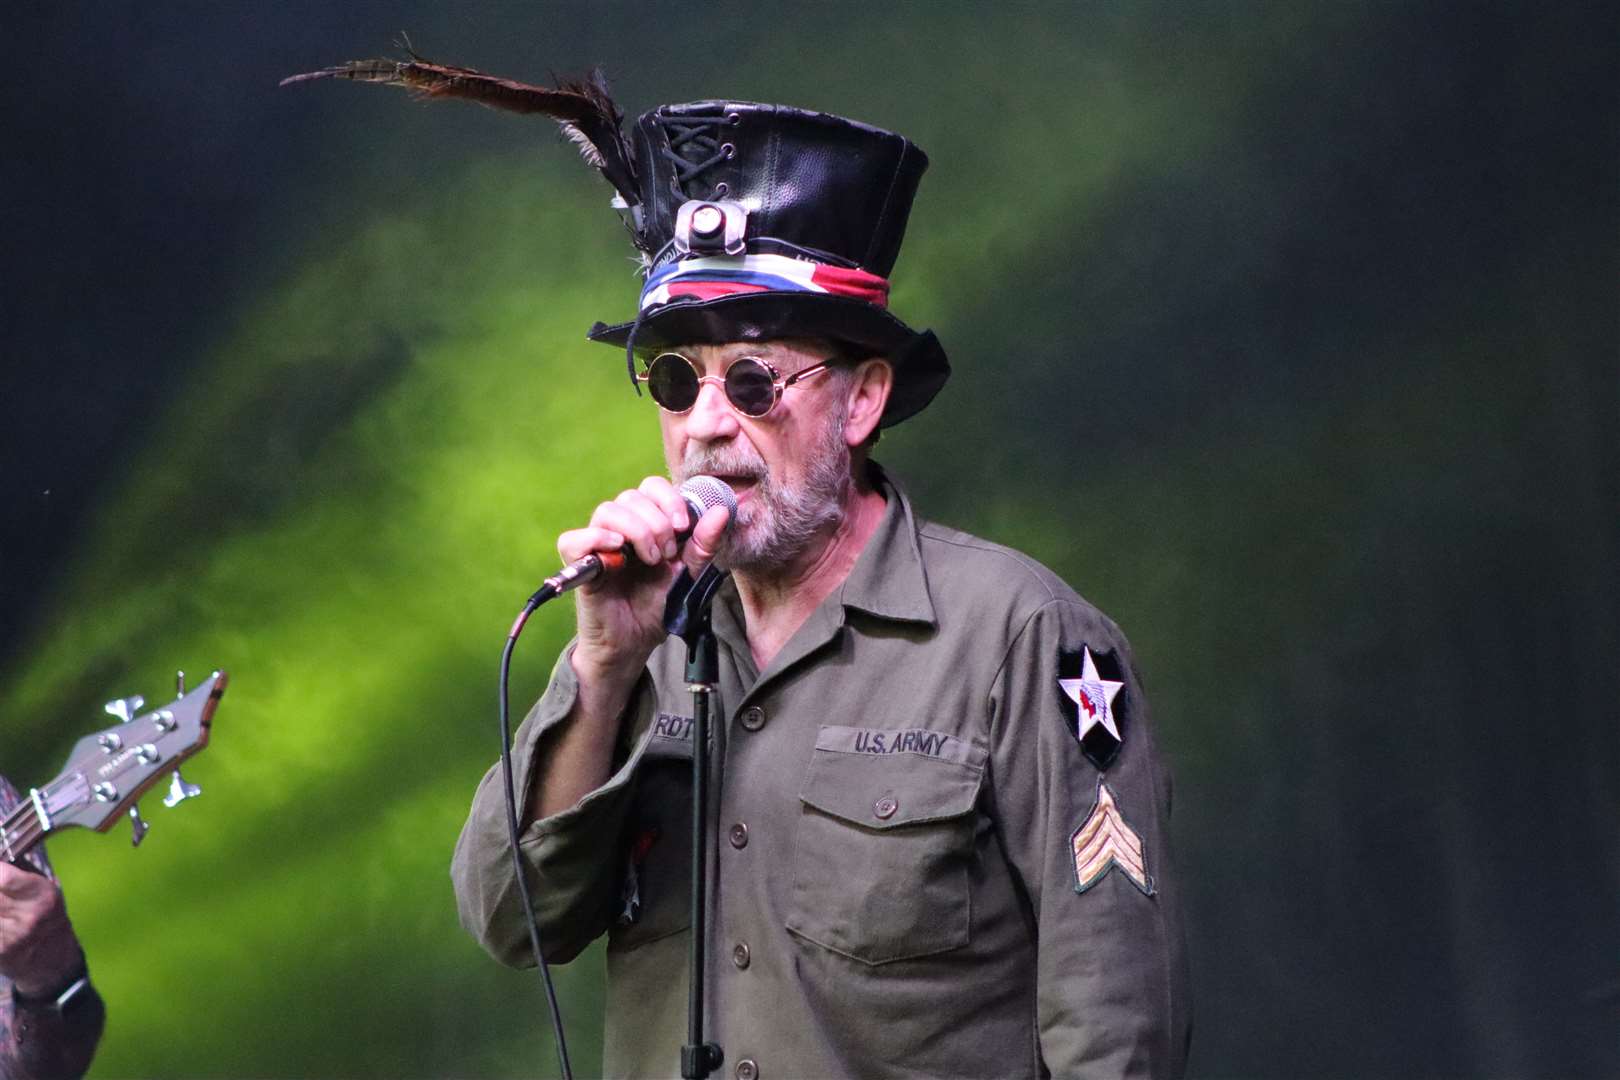 Marvellous Mo (Maurice Dunk) with hat at Groovy Fest 3 at the Woodstock, Sittingbourne. Picture: John Nurden